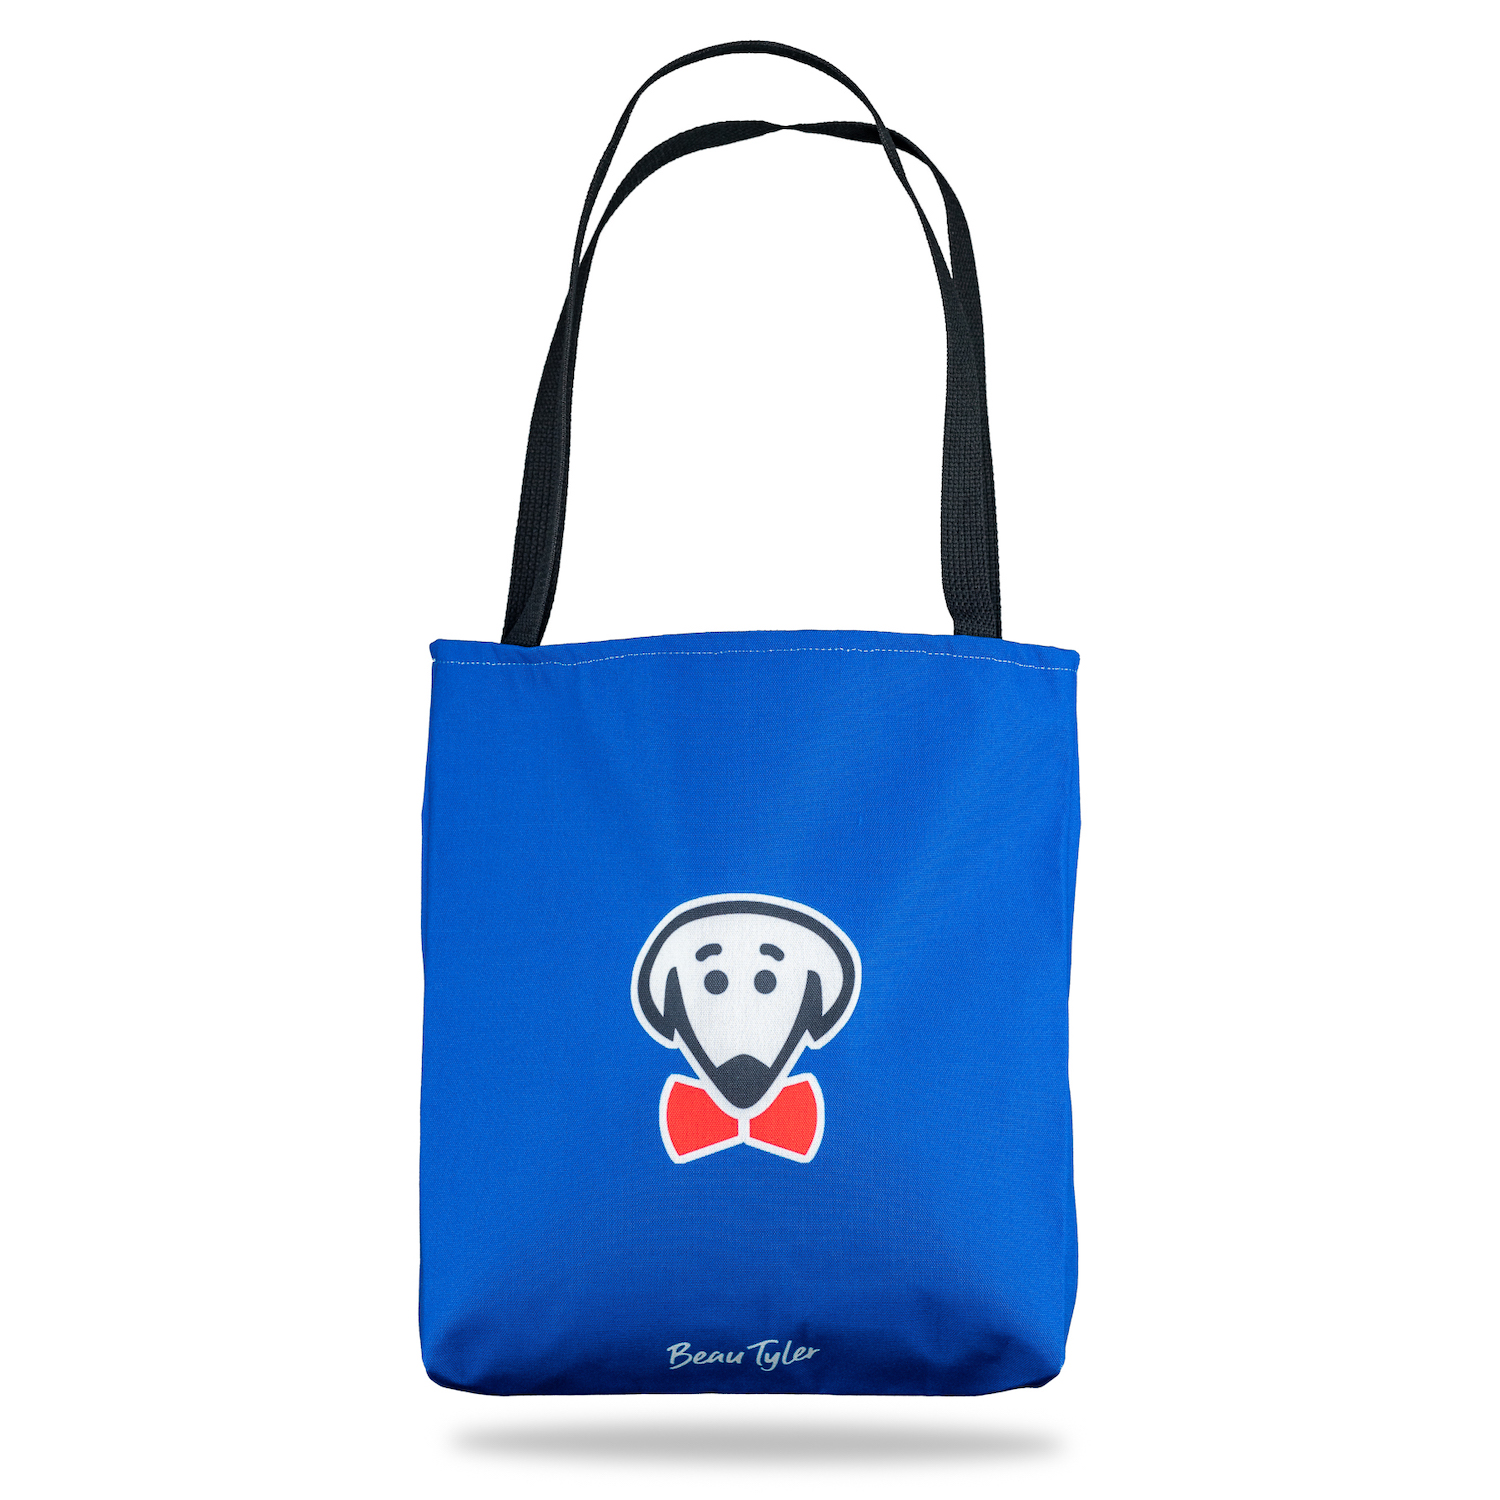 Beau Tyler - If I Could Fit My Dog In Here I Would! blue tote bag back